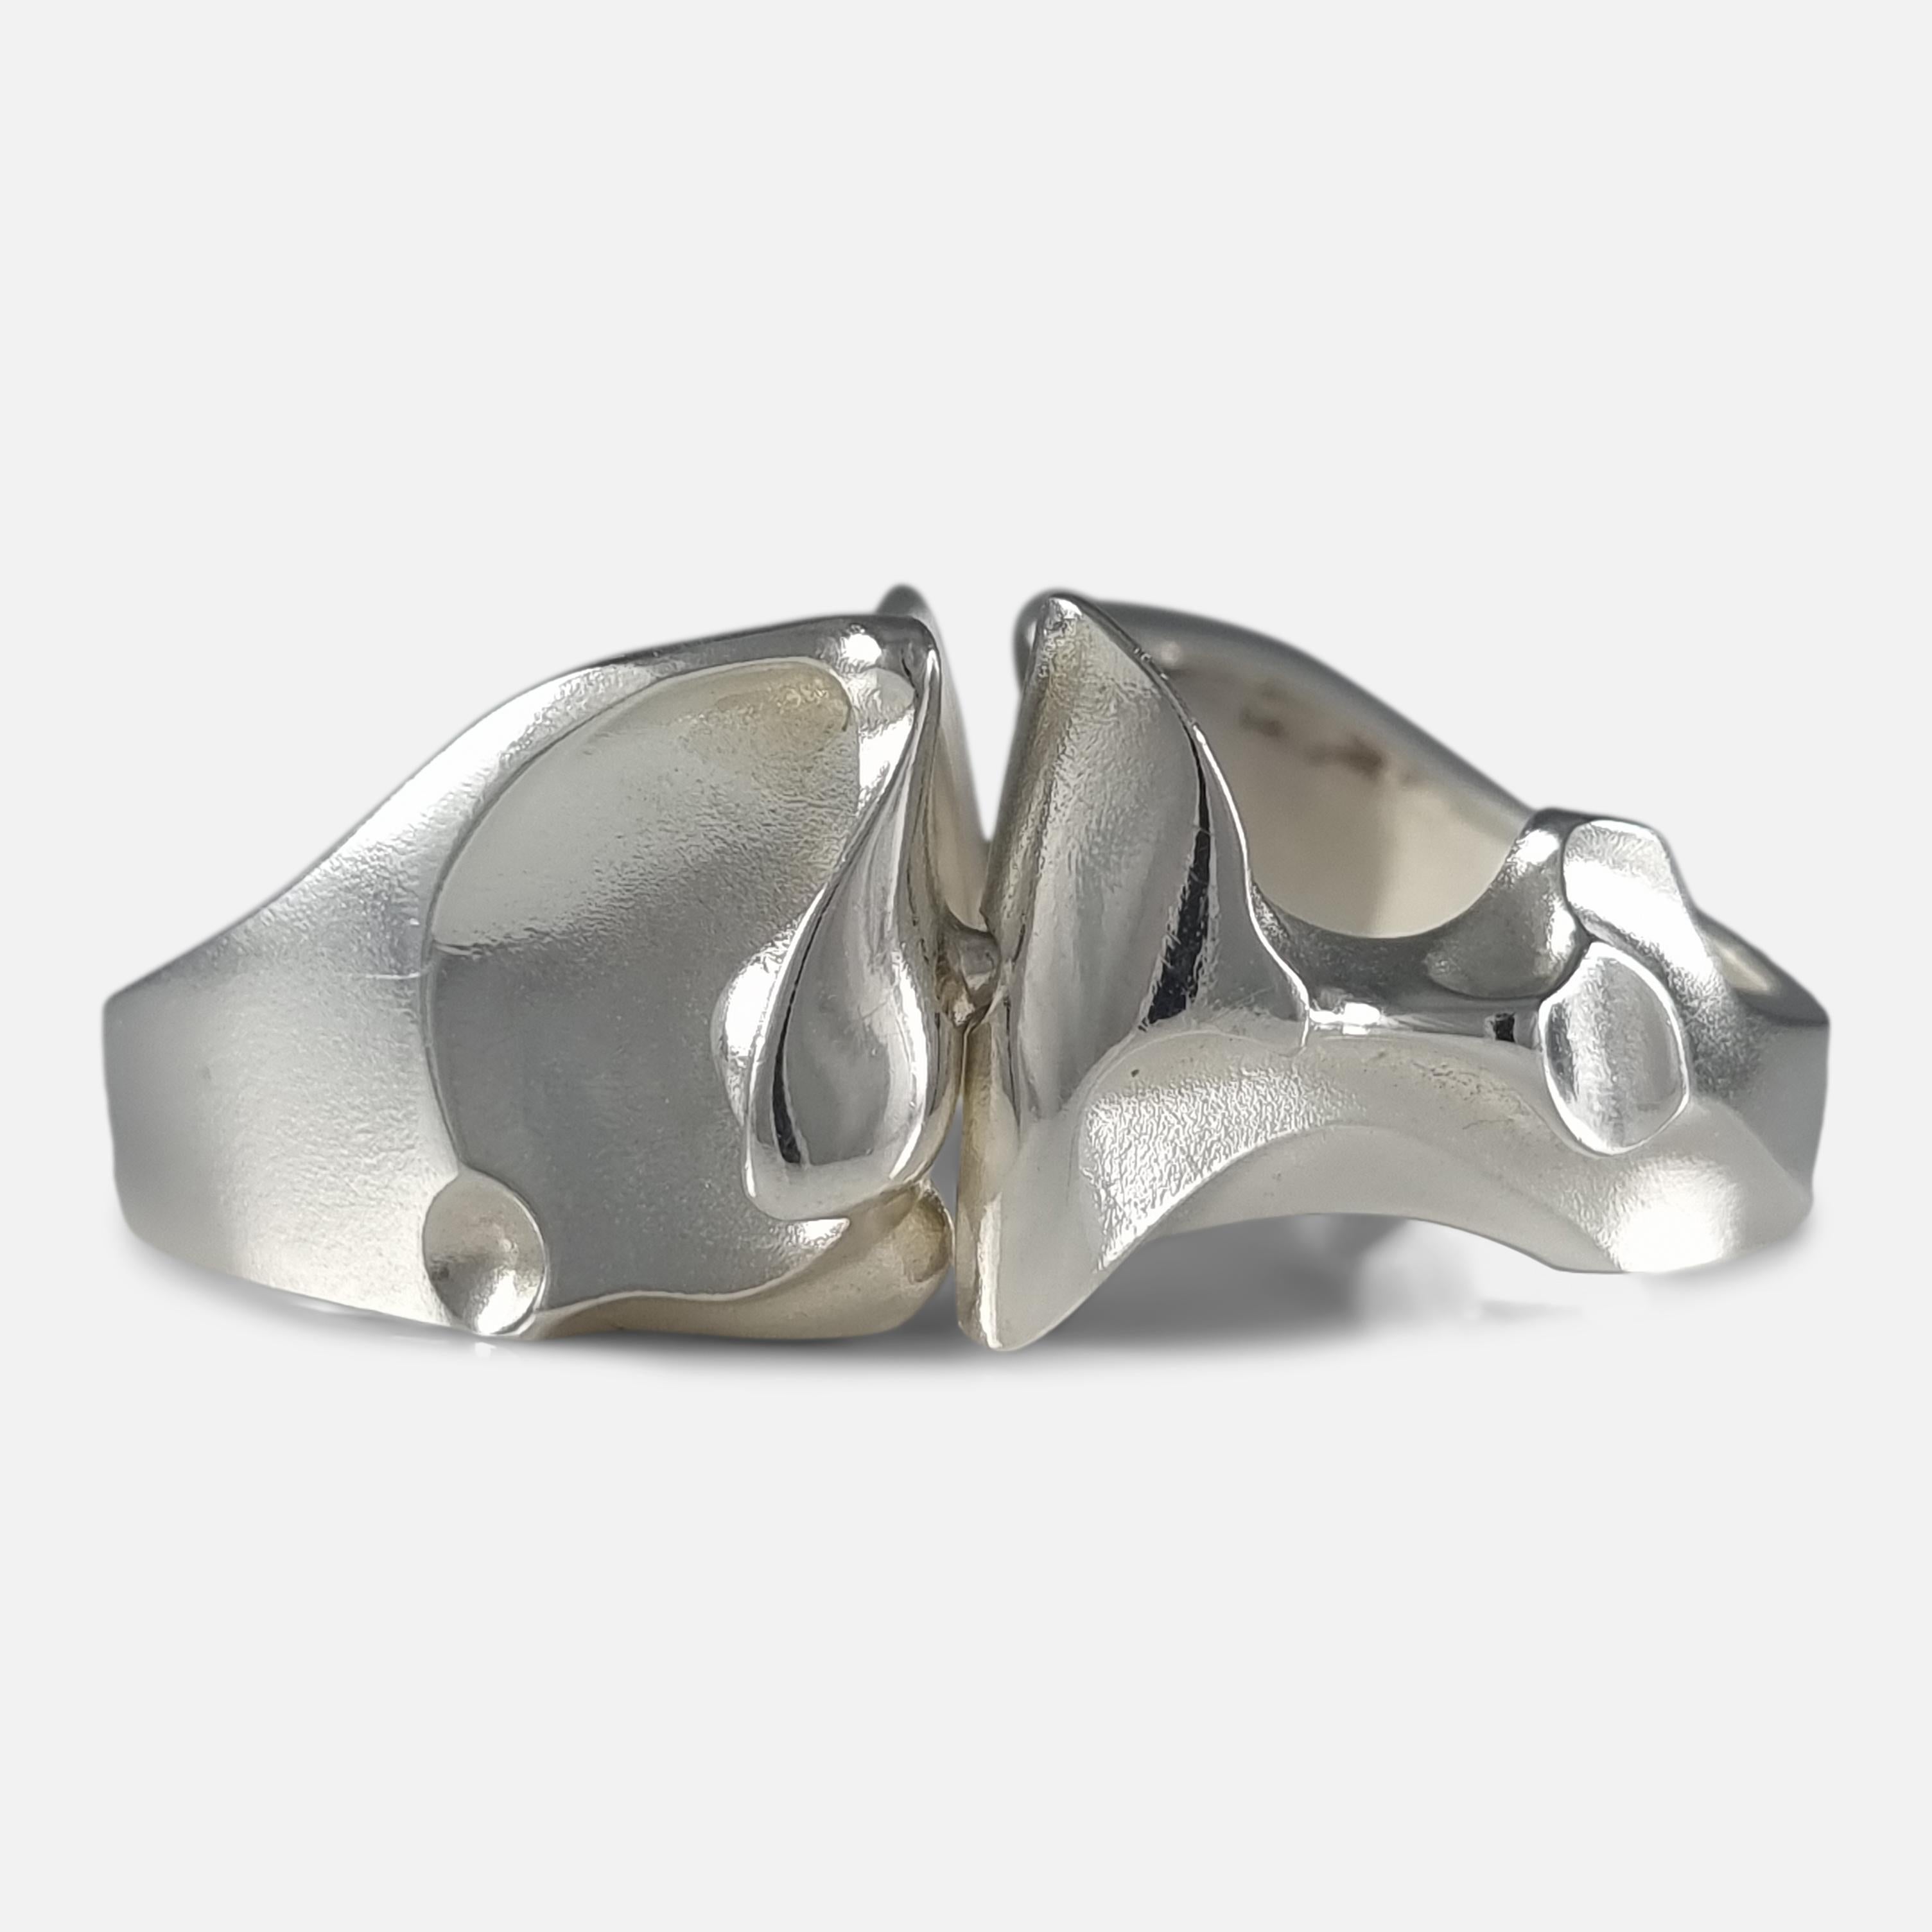 A Finnish sterling silver 'Zelda' bracelet designed by Björn Weckström for Lapponia.

The bracelet is hallmarked with the Finnish national mark, Lapponia makers mark, the Common Control Mark '925' to denote sterling silver, and date code 'B8' for